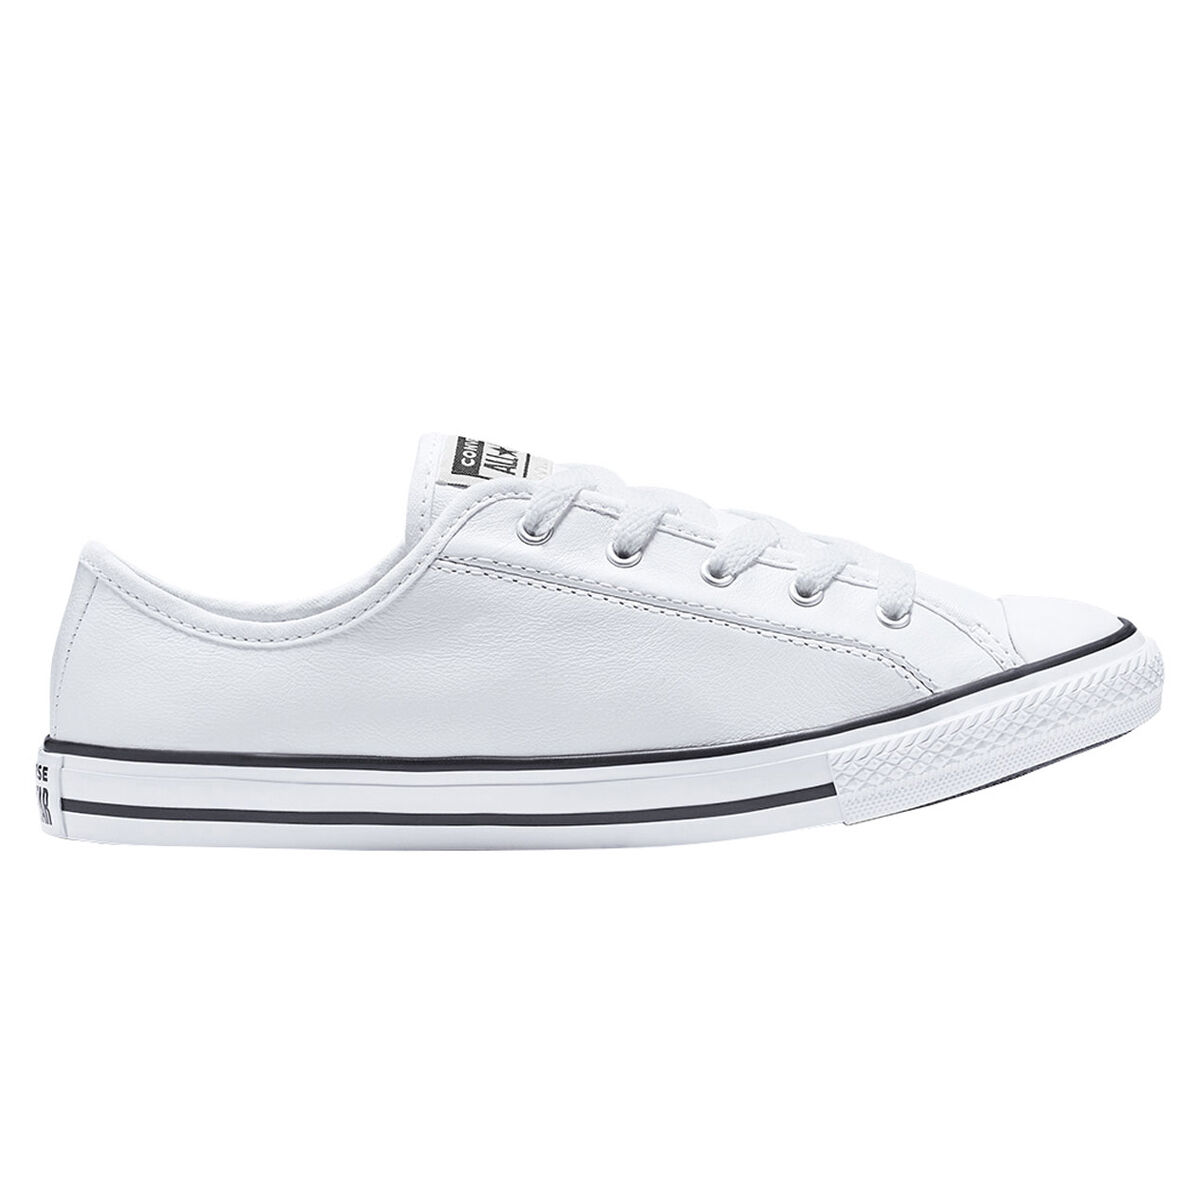 womens white leather chuck taylors